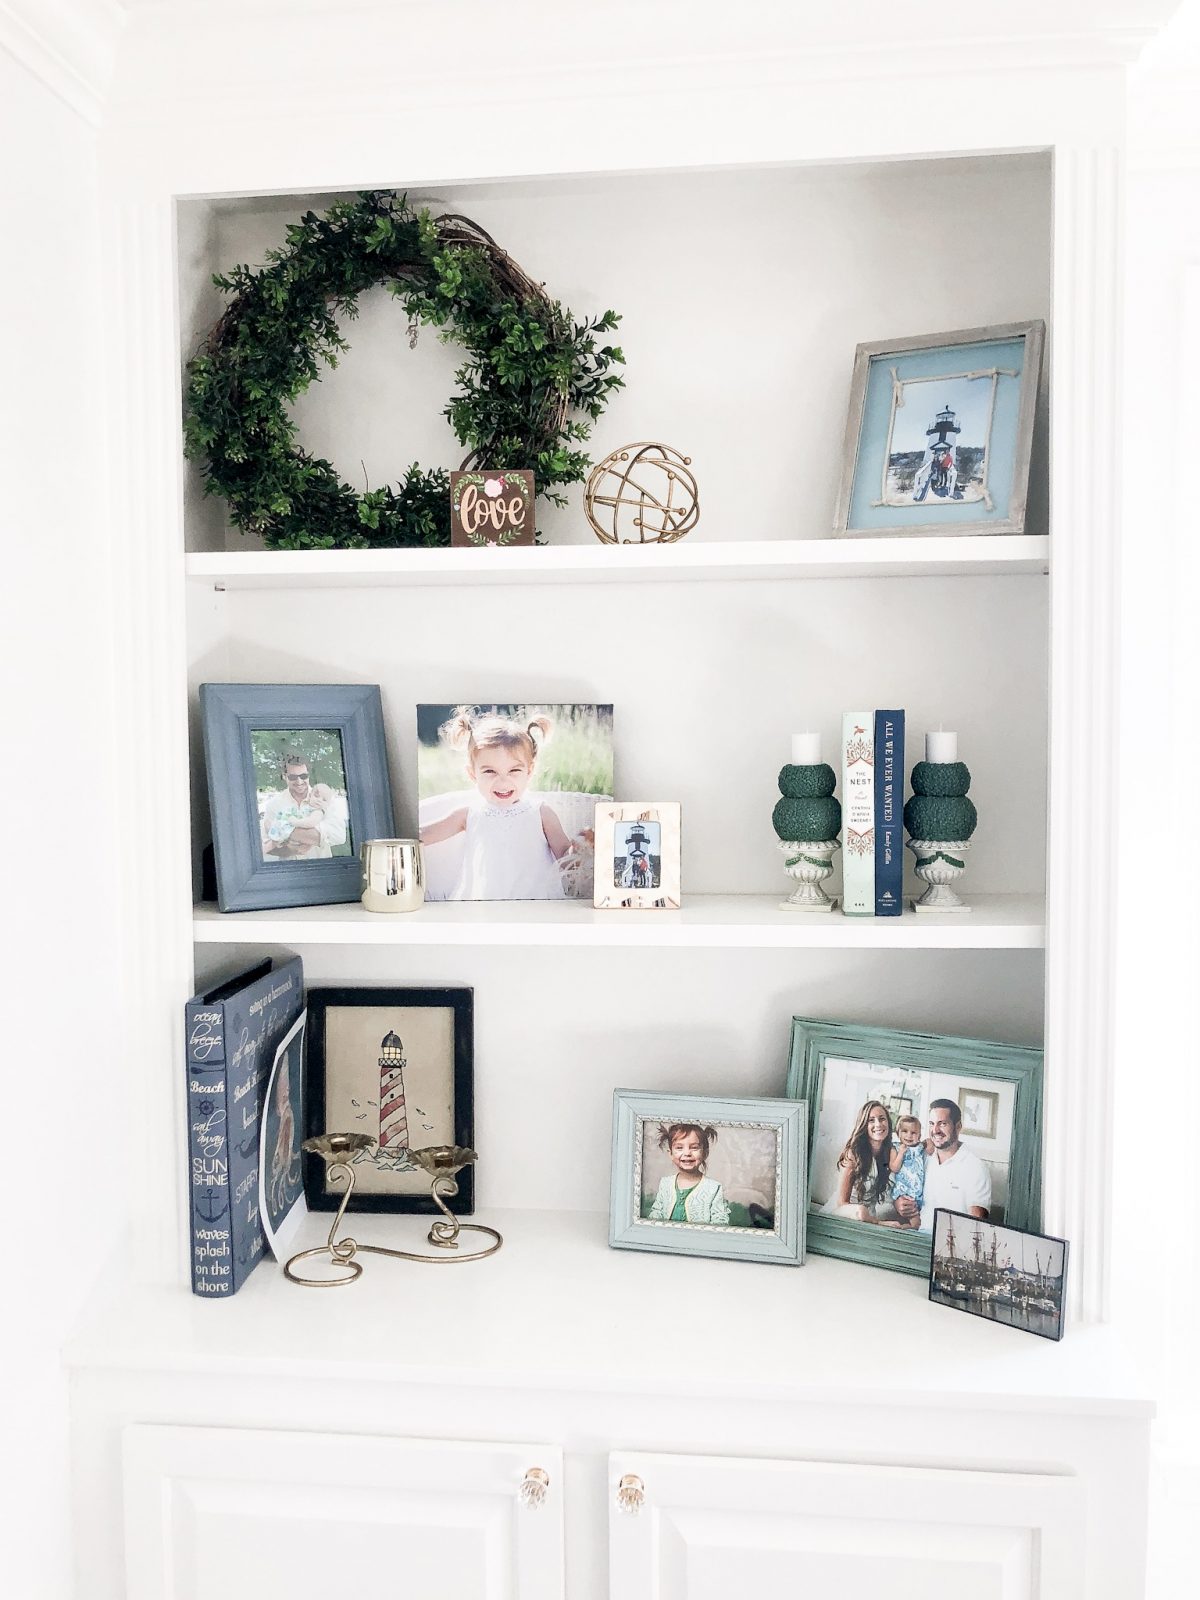 Built In Shelf Styling with Greens and Blues